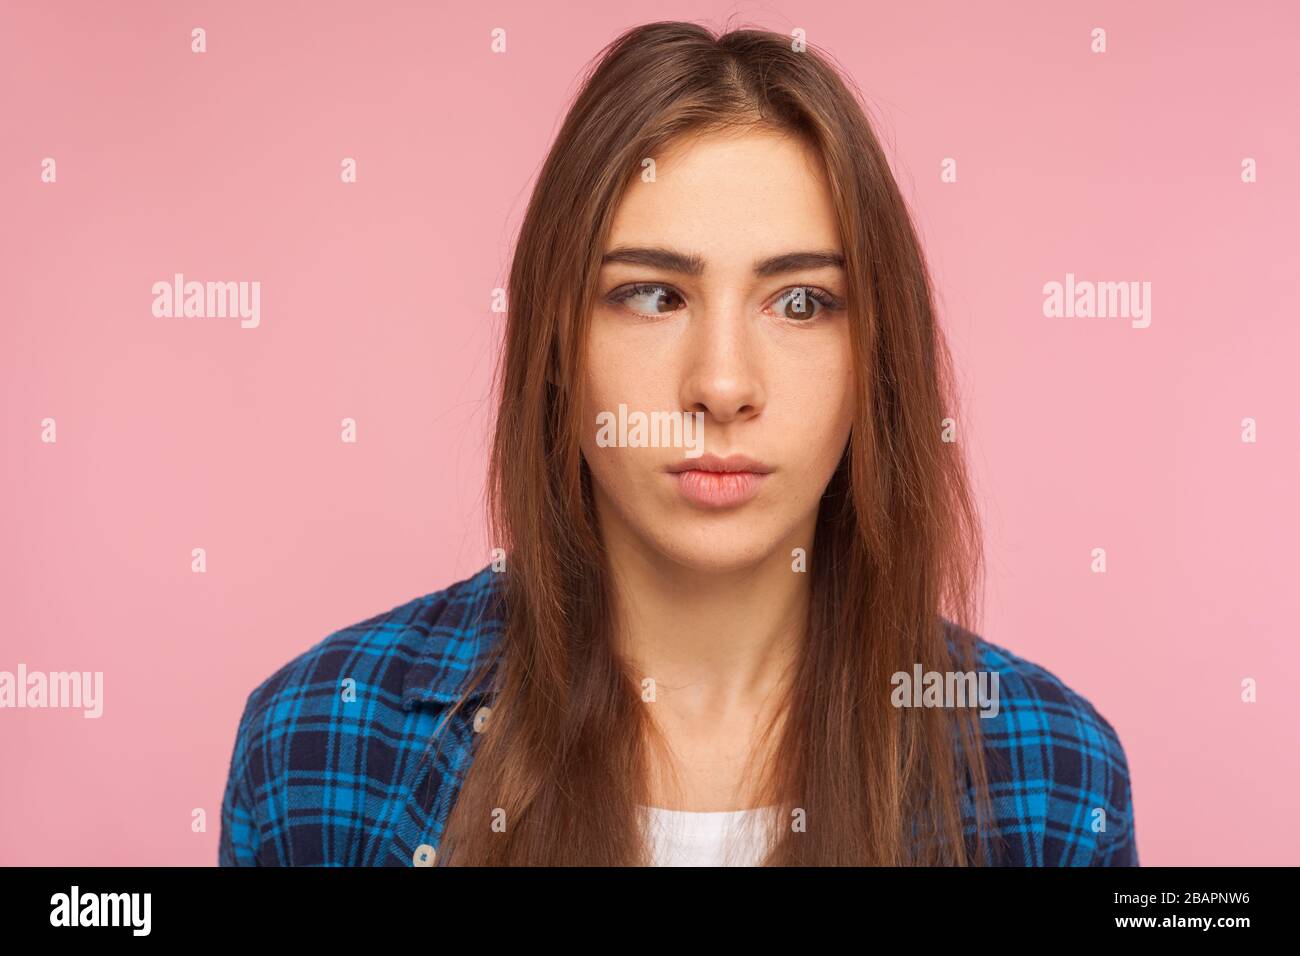 Closeup portrait of positive brunette girl in checkered shirt looking with one crossed eye, making silly awkward face, having fun, childish behavior. Stock Photo